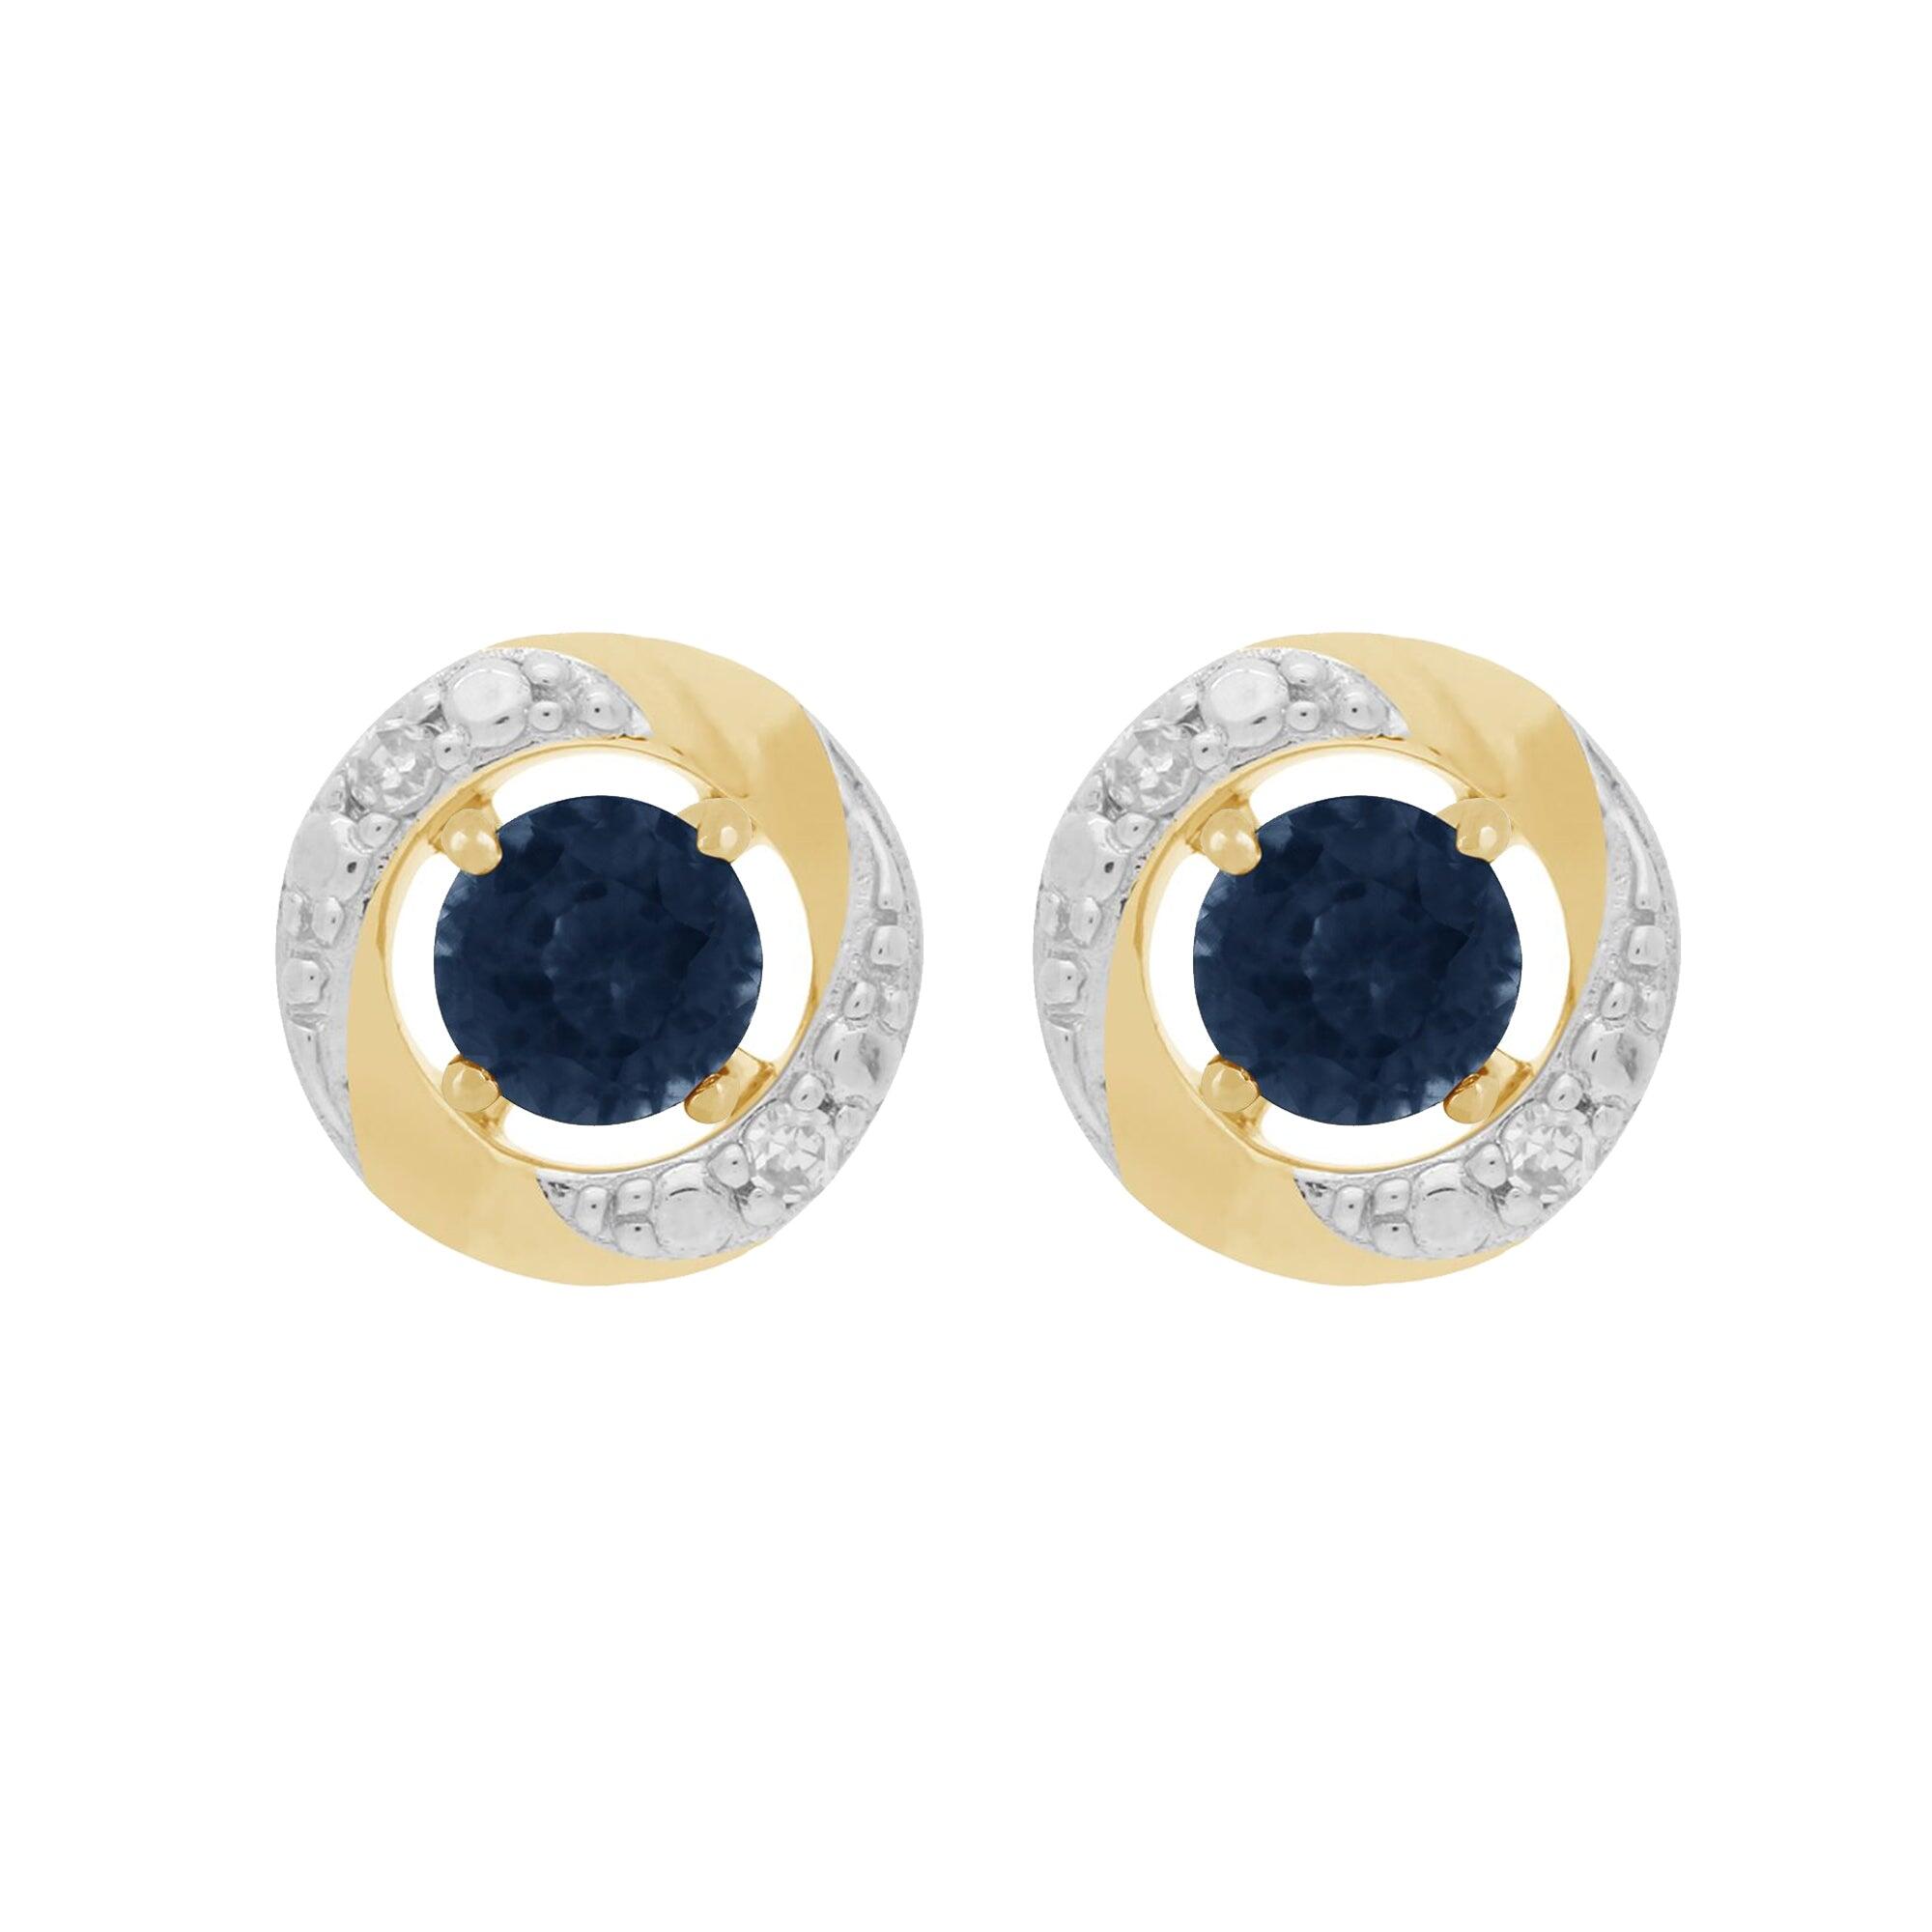 Classic Round Blue Sapphire Stud Earrings with Detachable Diamond Halo Ear Jacket in 9ct Yellow Gold